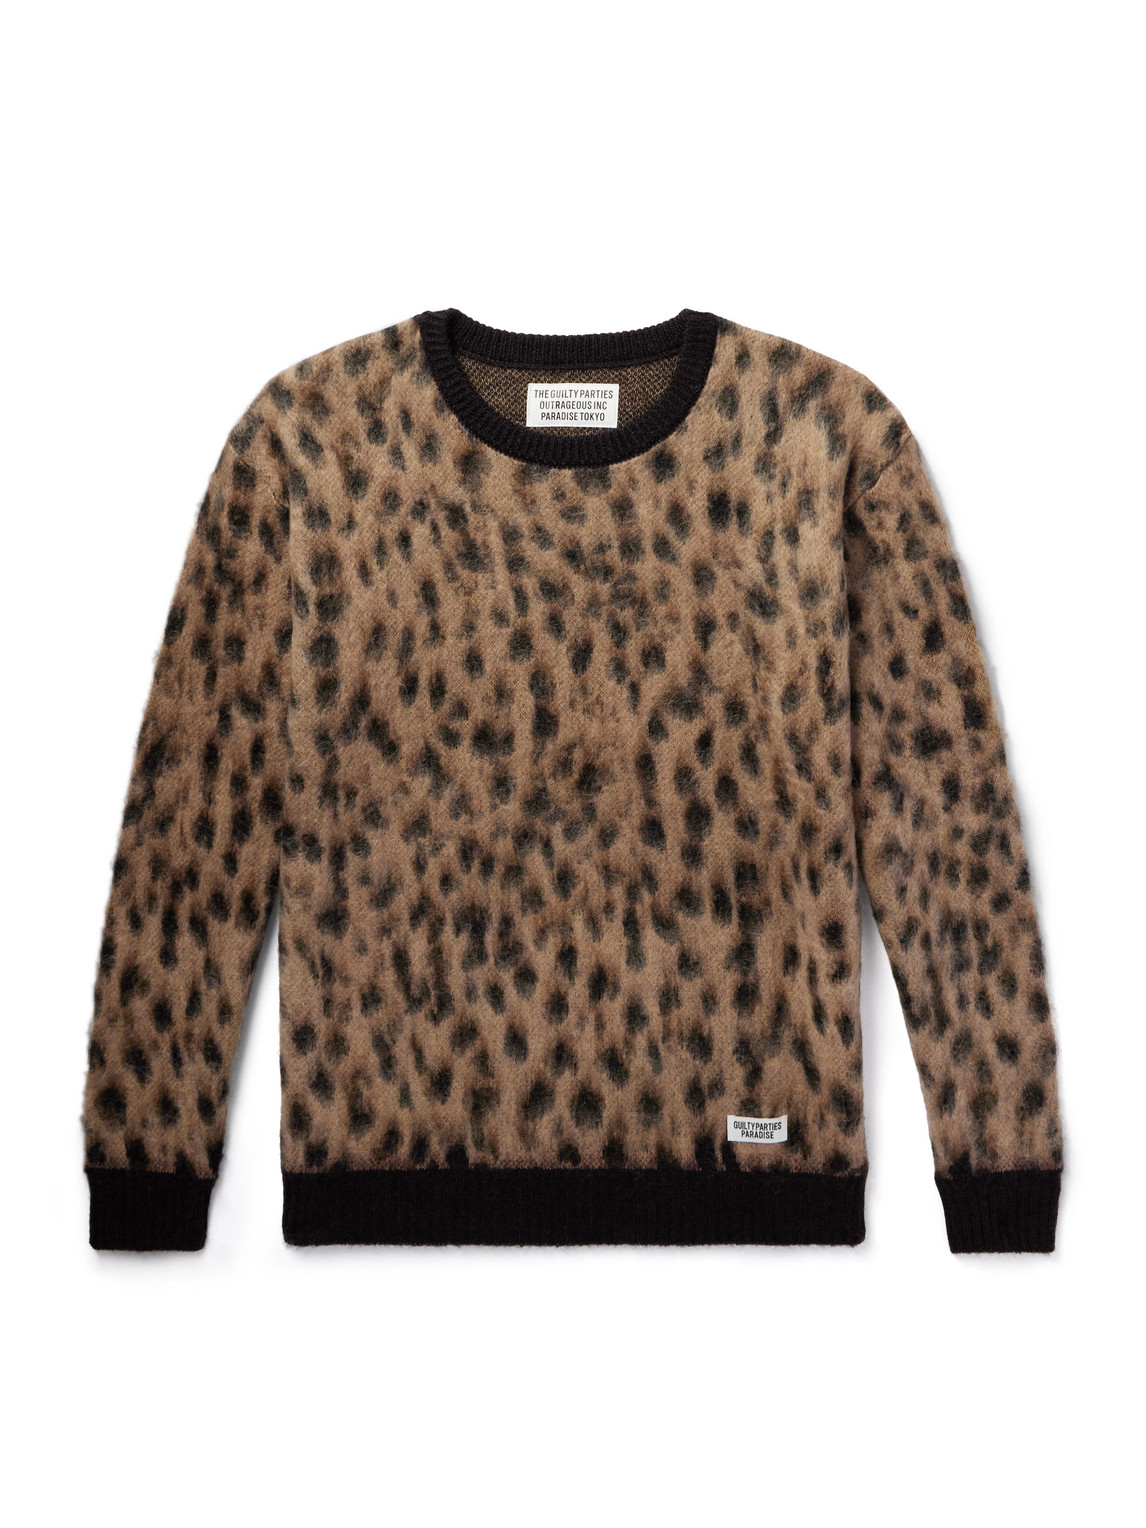 Leopard-Jacquard Knitted Sweater